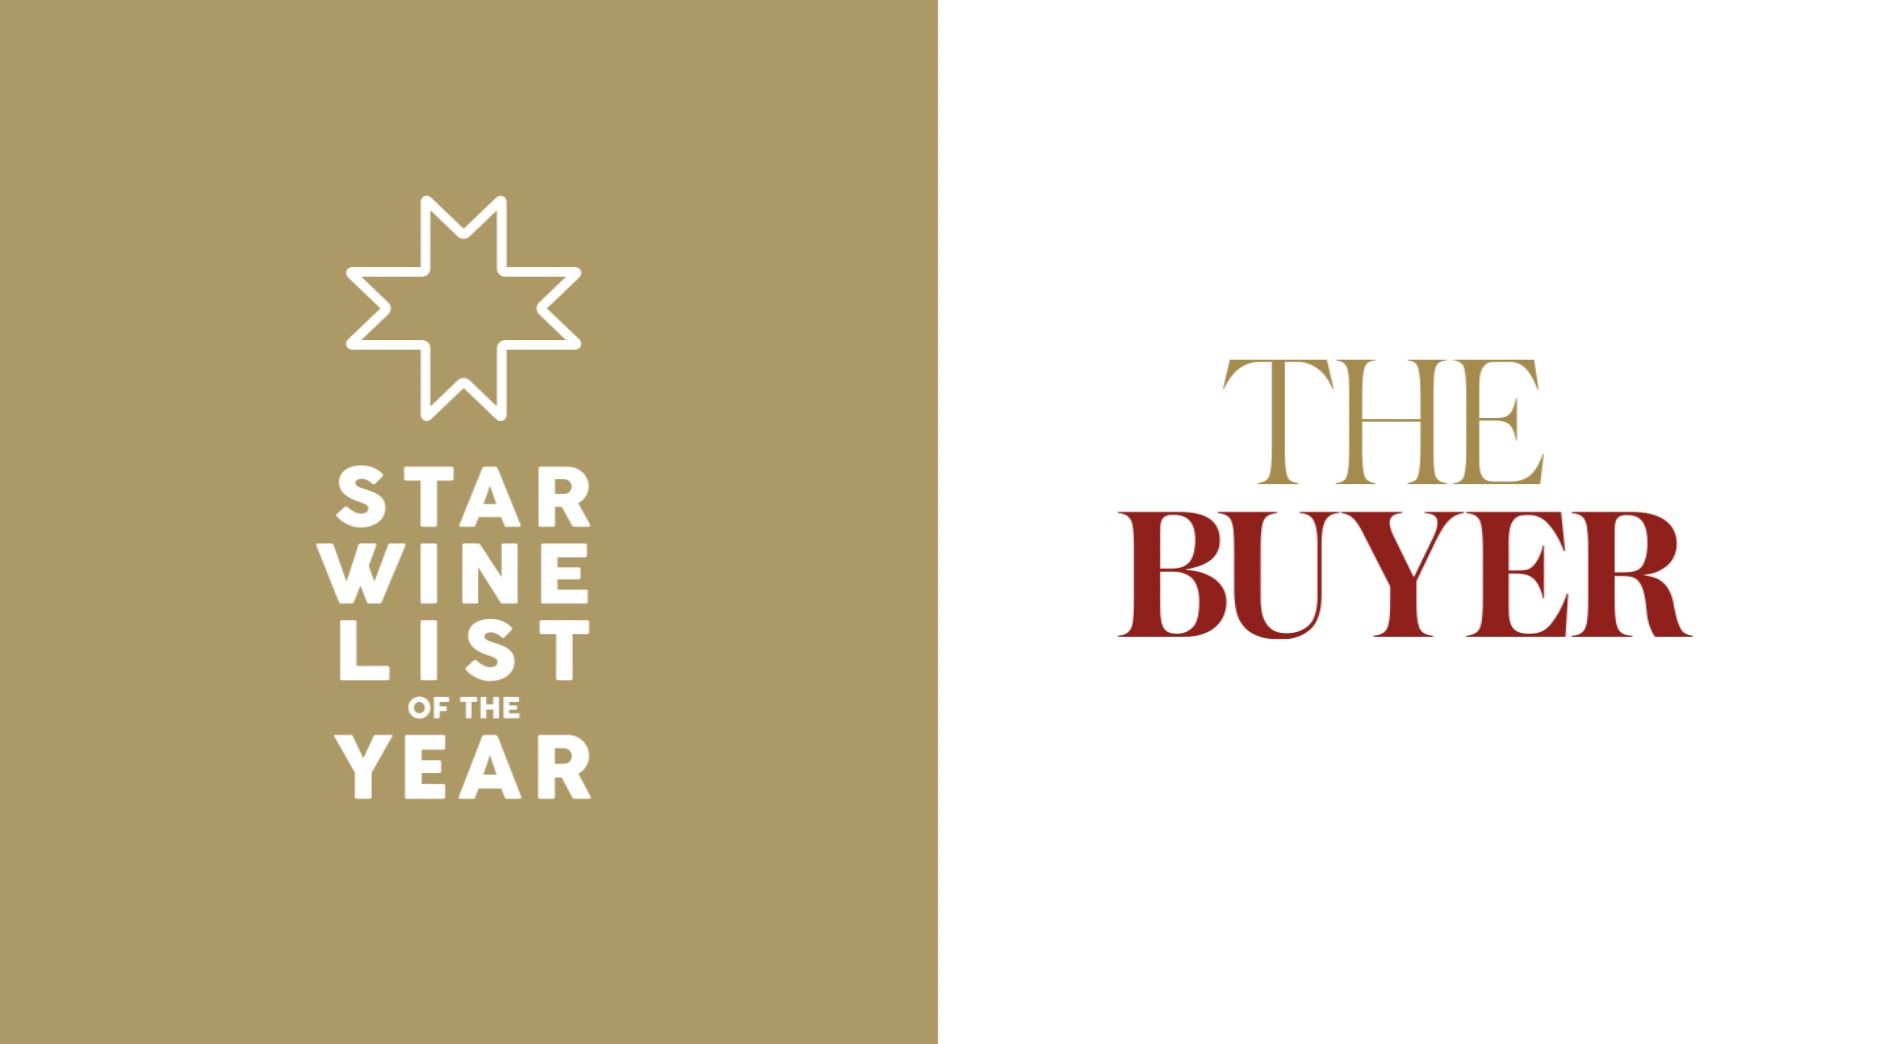 Finalists of Star Wine List of the Year with The Buyer announced